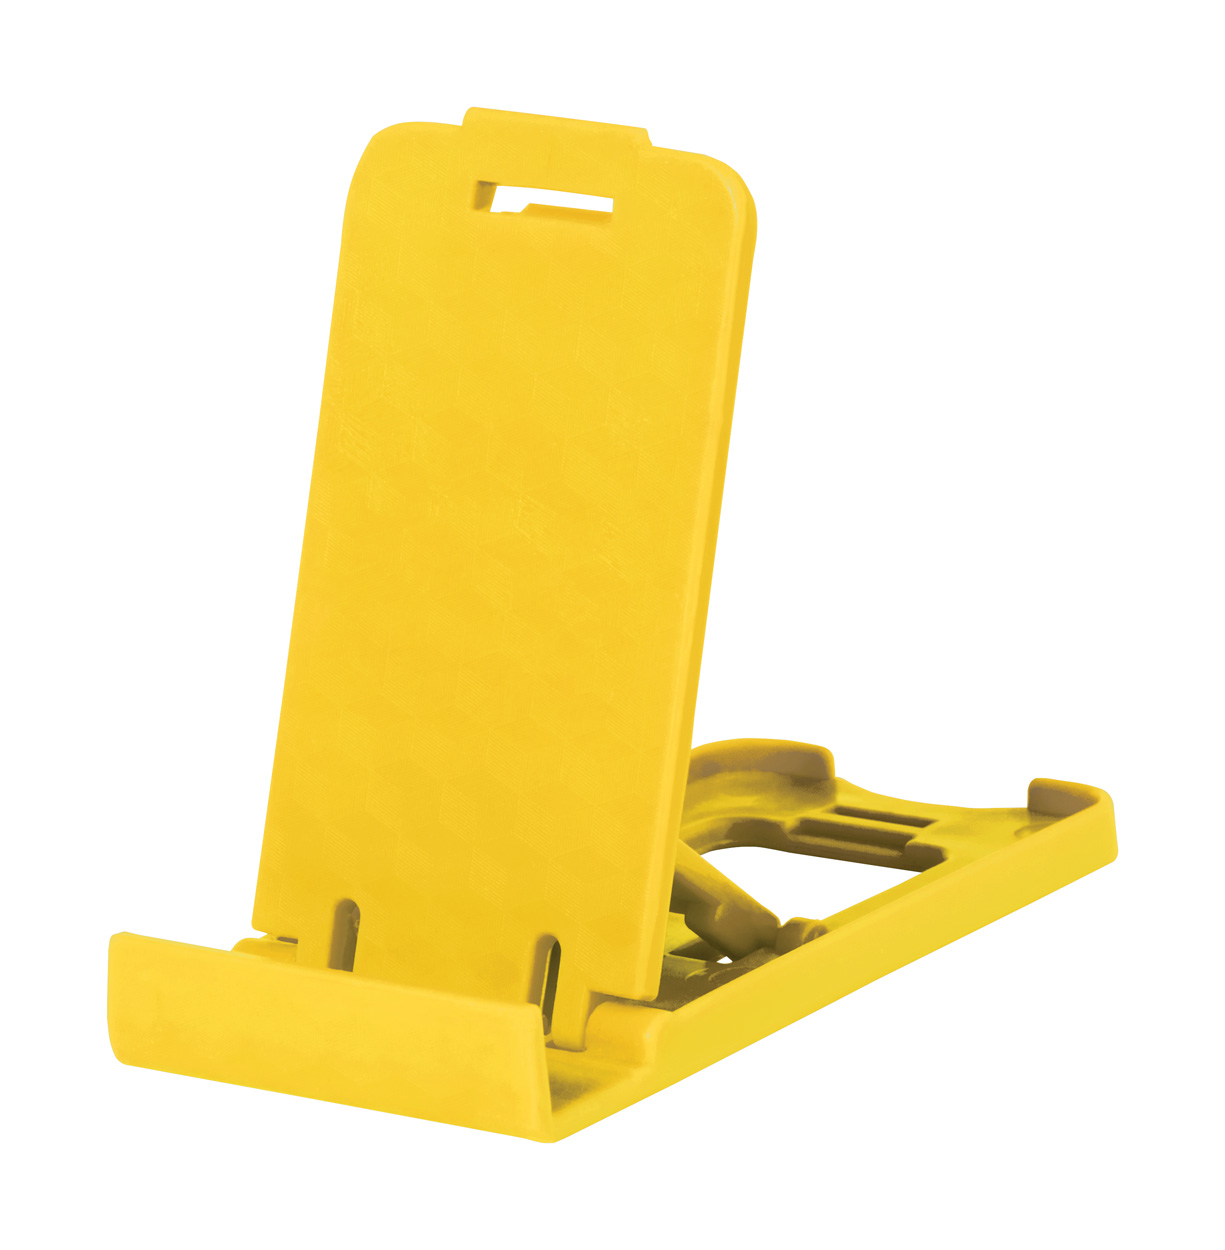 Asher mobile phone stand - yellow